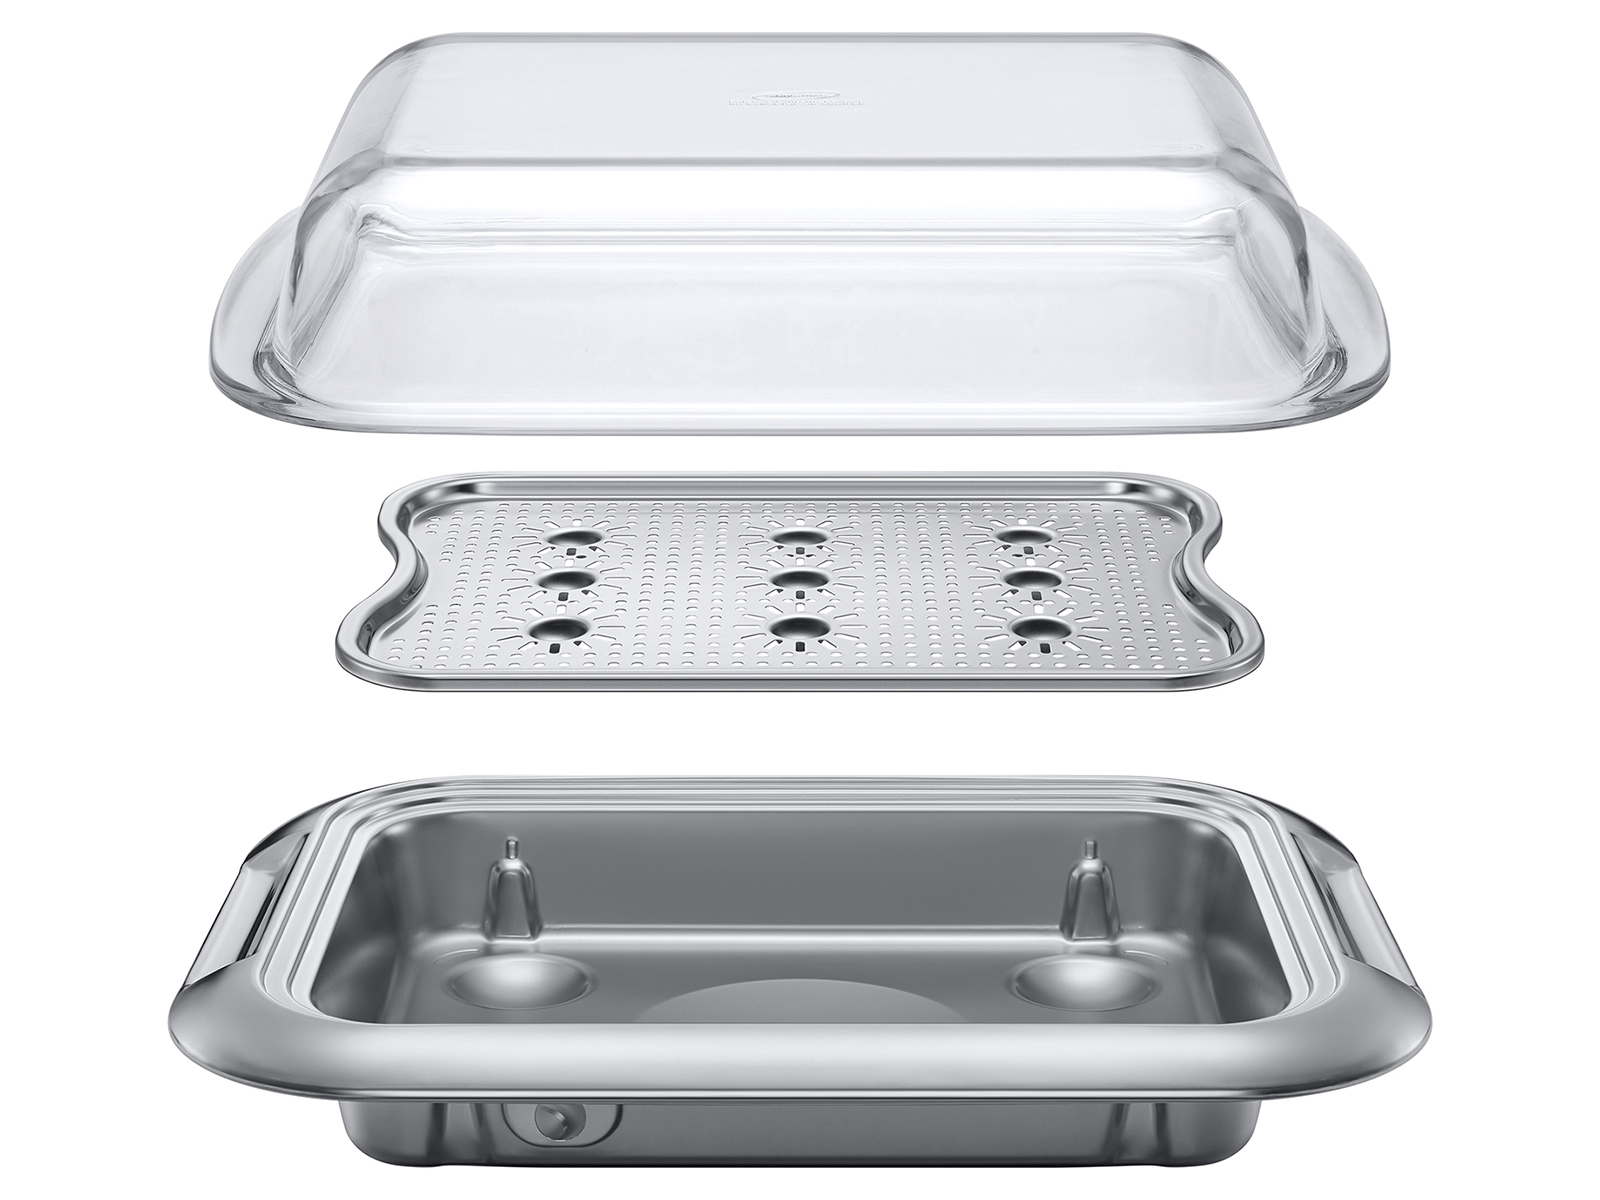 https://image-us.samsung.com/SamsungUS/home/home-appliances/home-appliance-accessories/wall-oven/nv-as7000cs-aa/NV-AS7000CS_Steam_Cook_Tray_02_SCOM.jpg?$product-details-jpg$